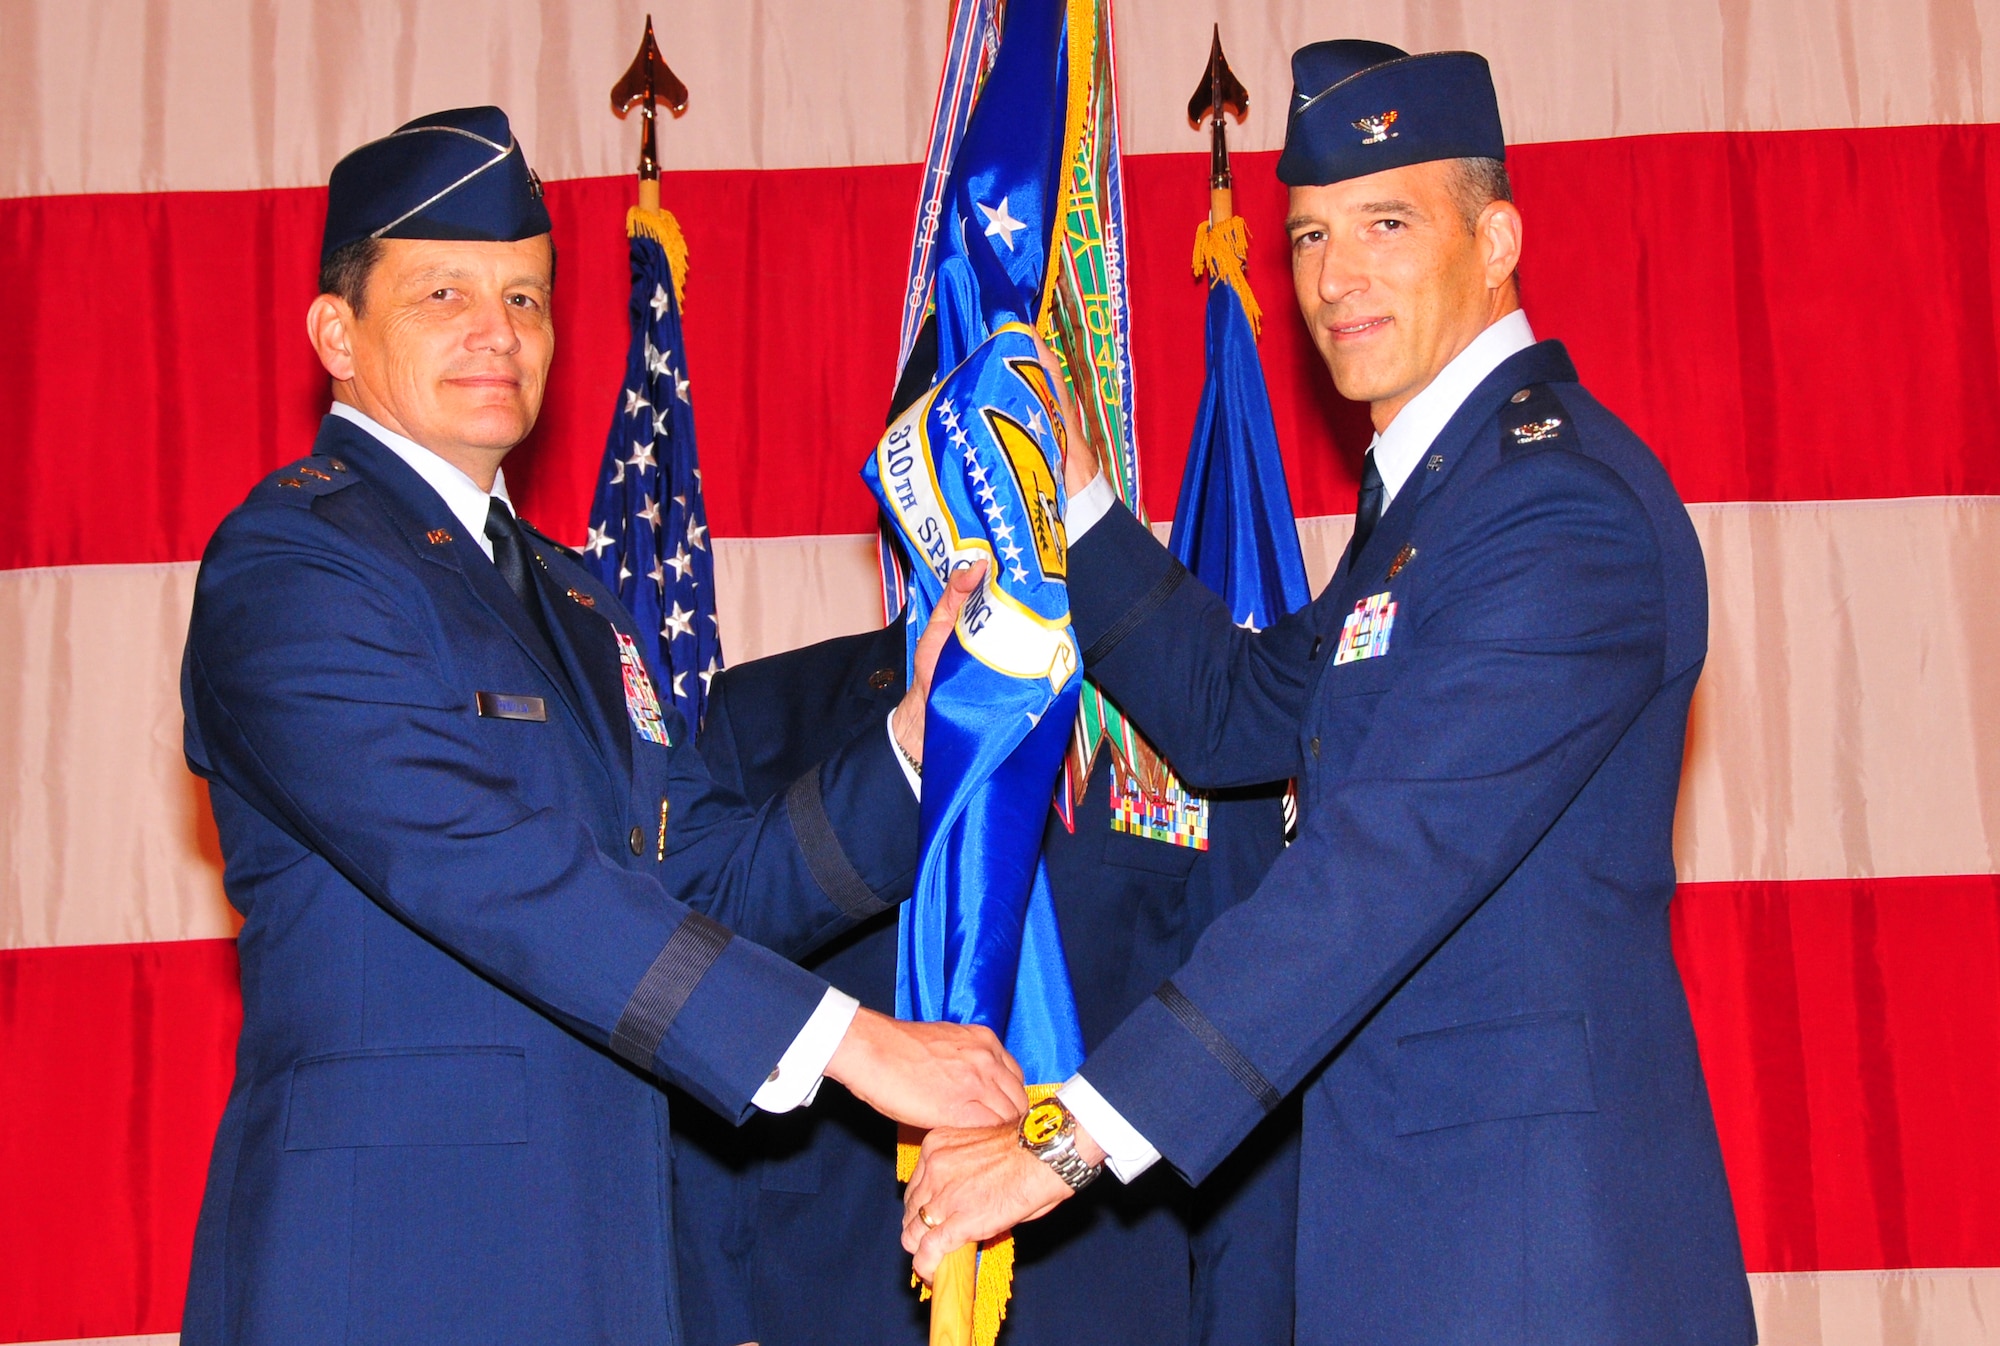 Maj. Gen. Frank J. Padilla, 10th Air Force commander, left, hands the 310th Space Wing flag and command of the Air Force Reserve's only space wing to Colonel Jeffrey "Sal" Mineo. Colonel Mineo became the third commander of the 310th Space Wing during the Jan. 9 ceremony hosted by its sister wing, the 302nd Airlilft Wing at Peterson Air Force Base, Colo. (U.S. Air Force photo/Tech. Sgt. Nick Ontiveros)